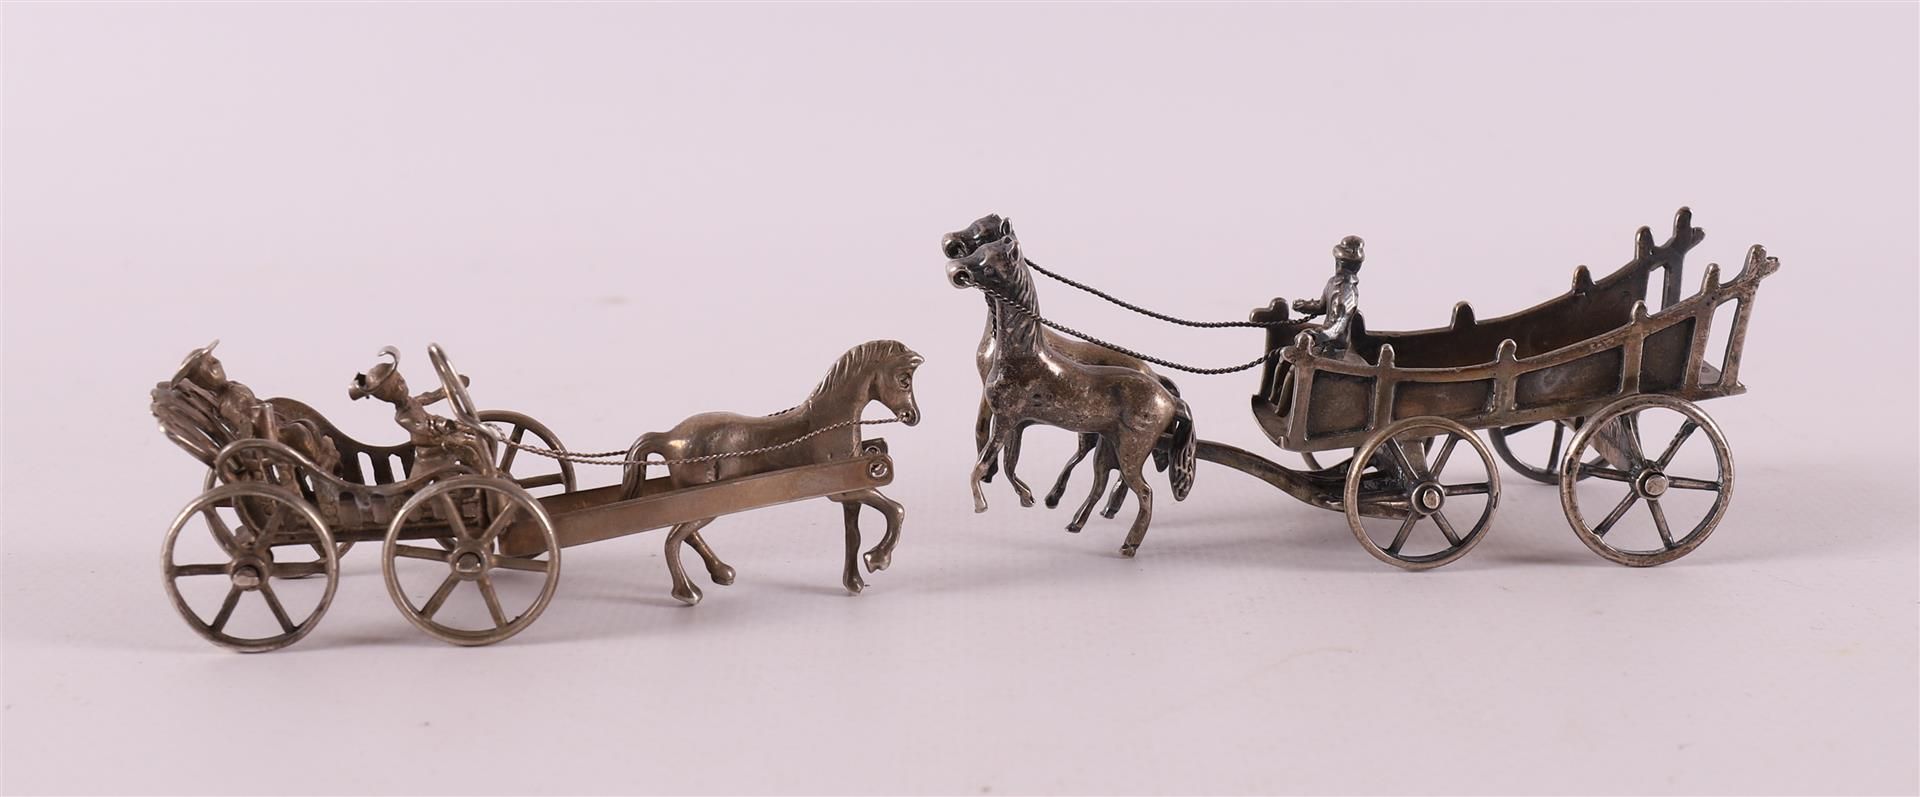 Etagere silver. A horse with hay wagon + carriage with one horse, 20th century